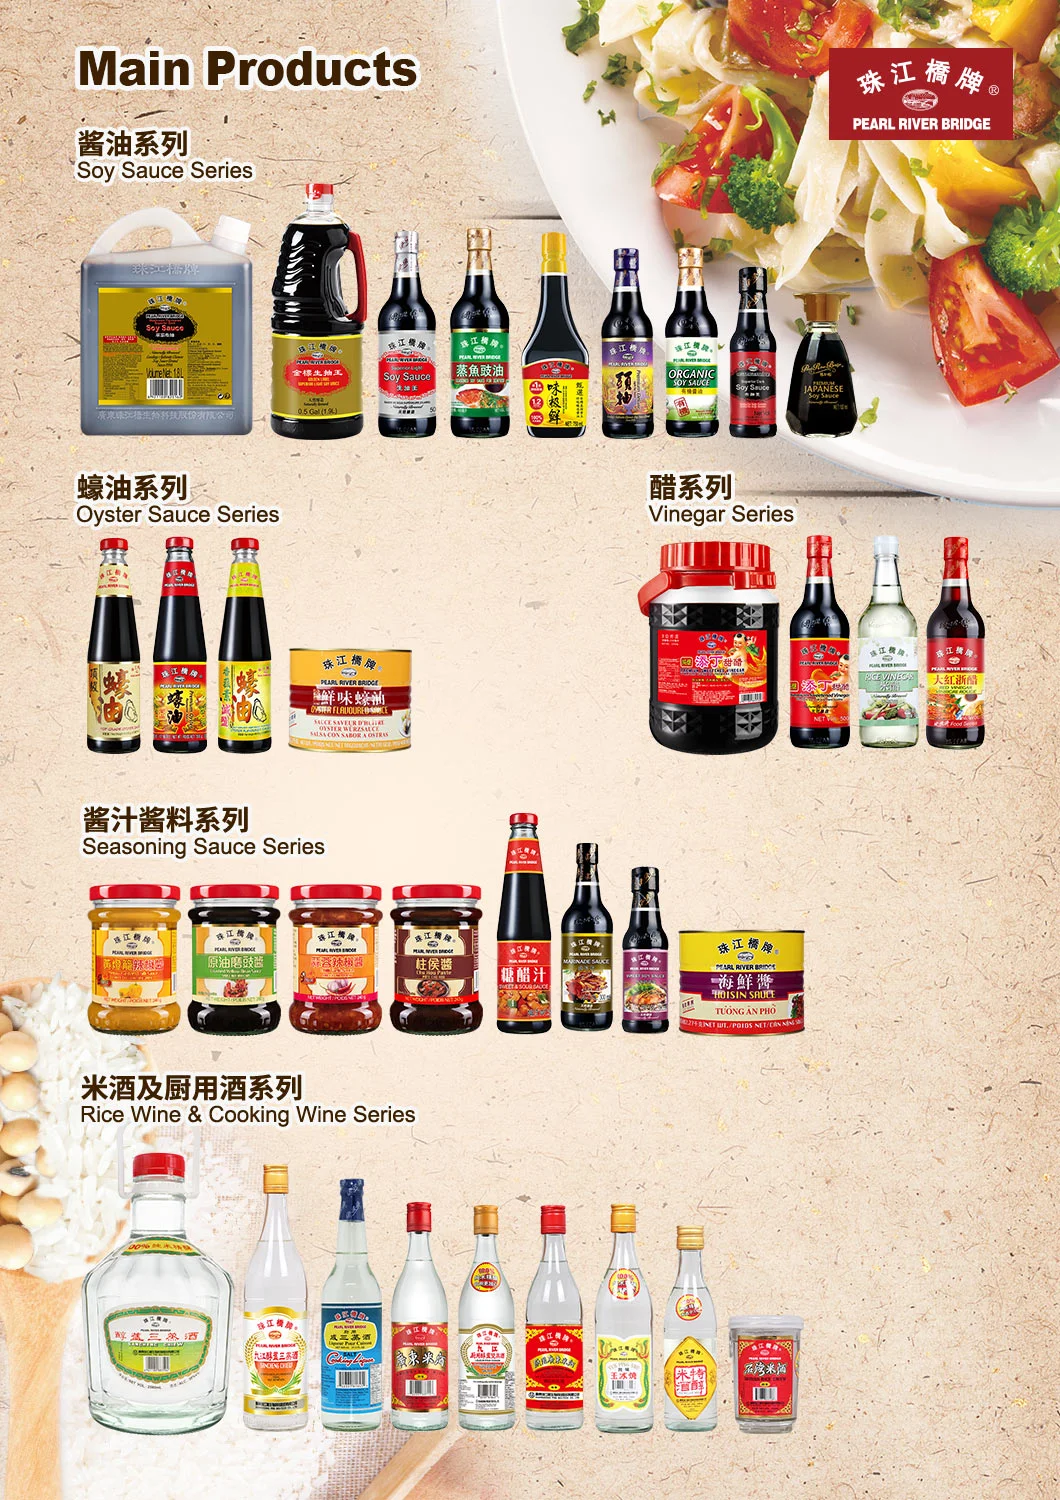 Pearl River Bridge (the Leading Soy Sauce Brand) Delicious Dark Soy Sauce 500ml for Cooking Food